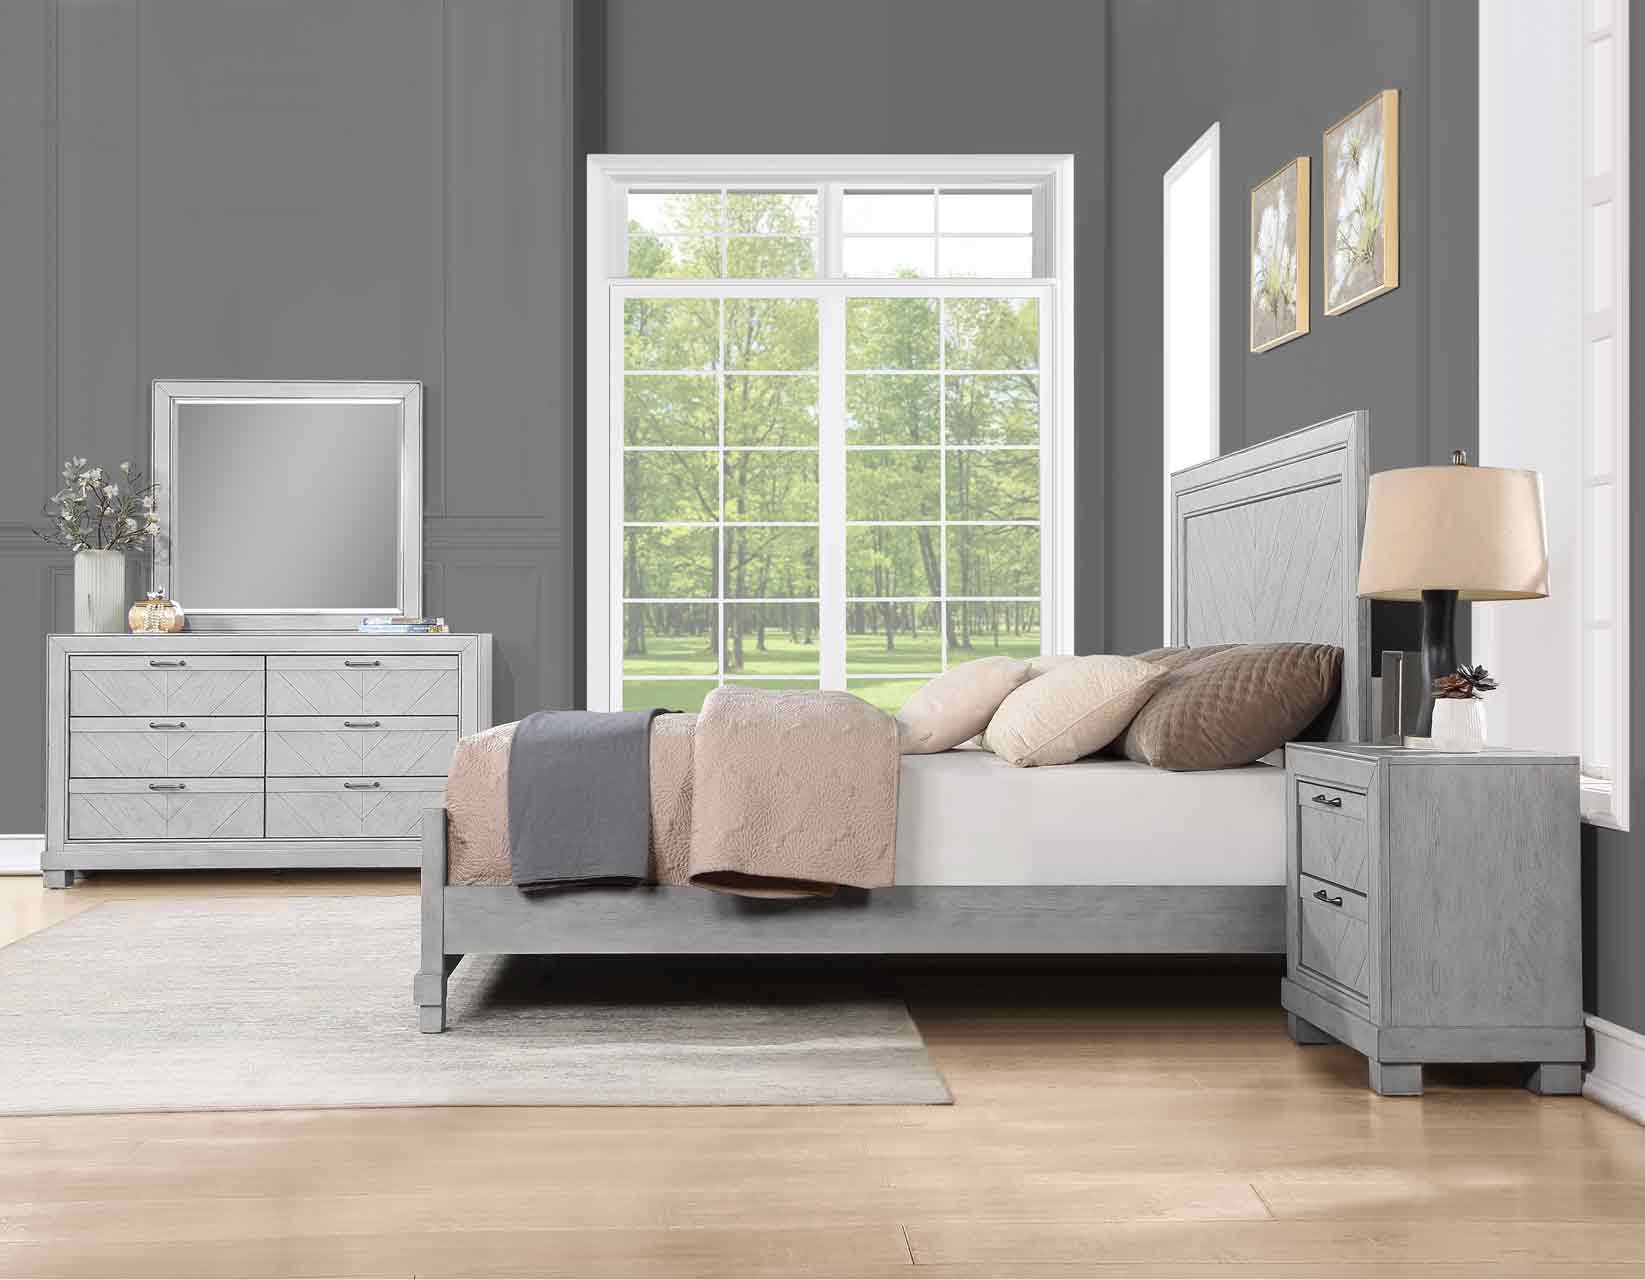 Montana Gray Bedroom Collection by Steve Silver